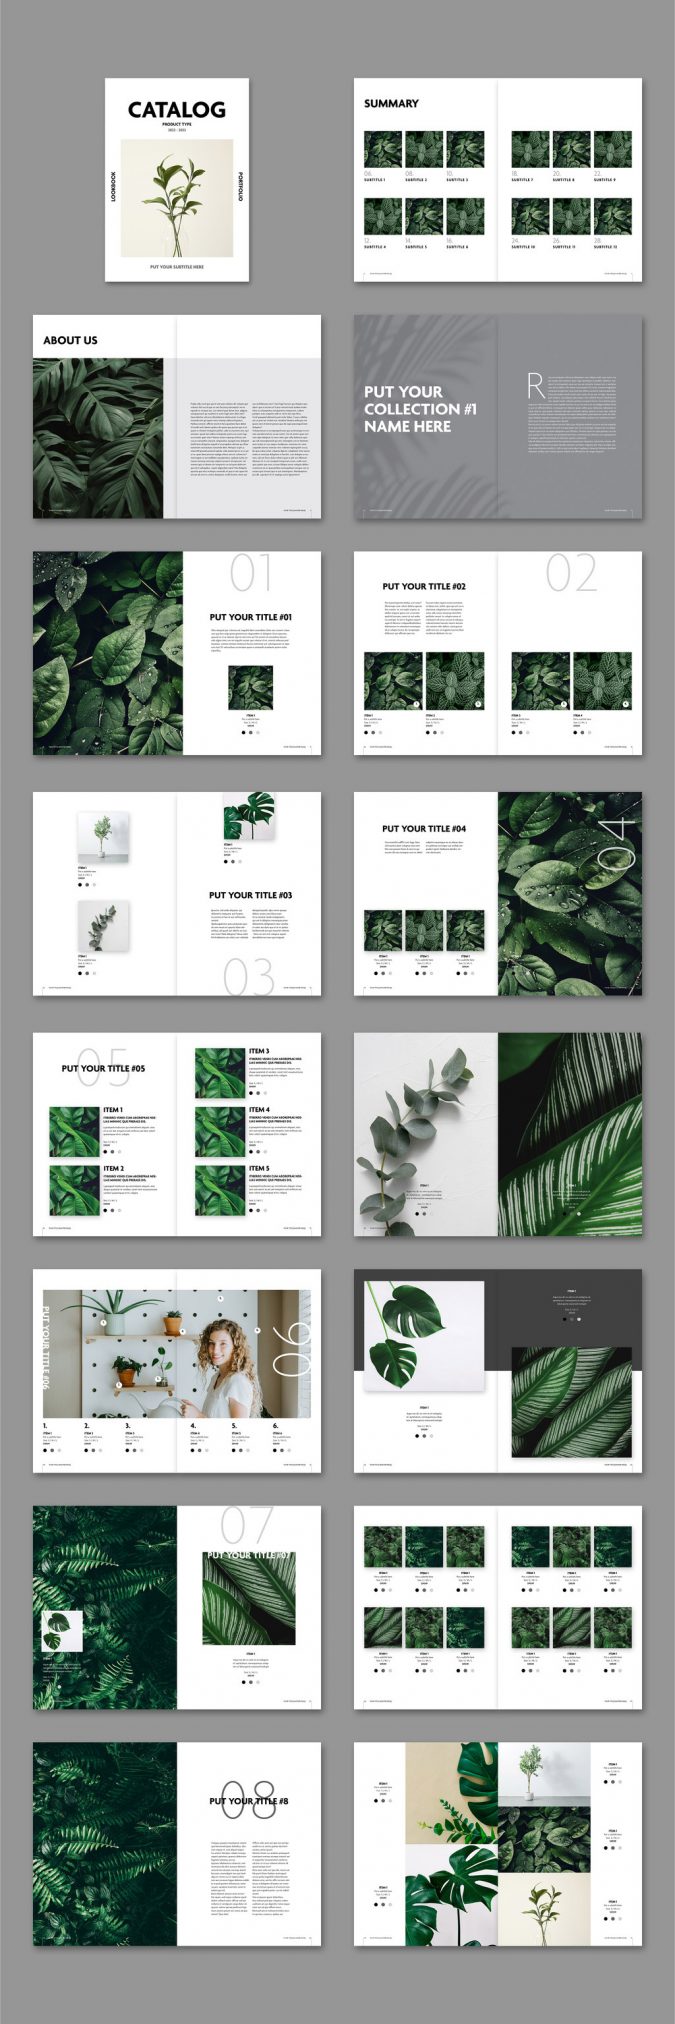 Catalog Adobe InDesign Template with 32 Pages